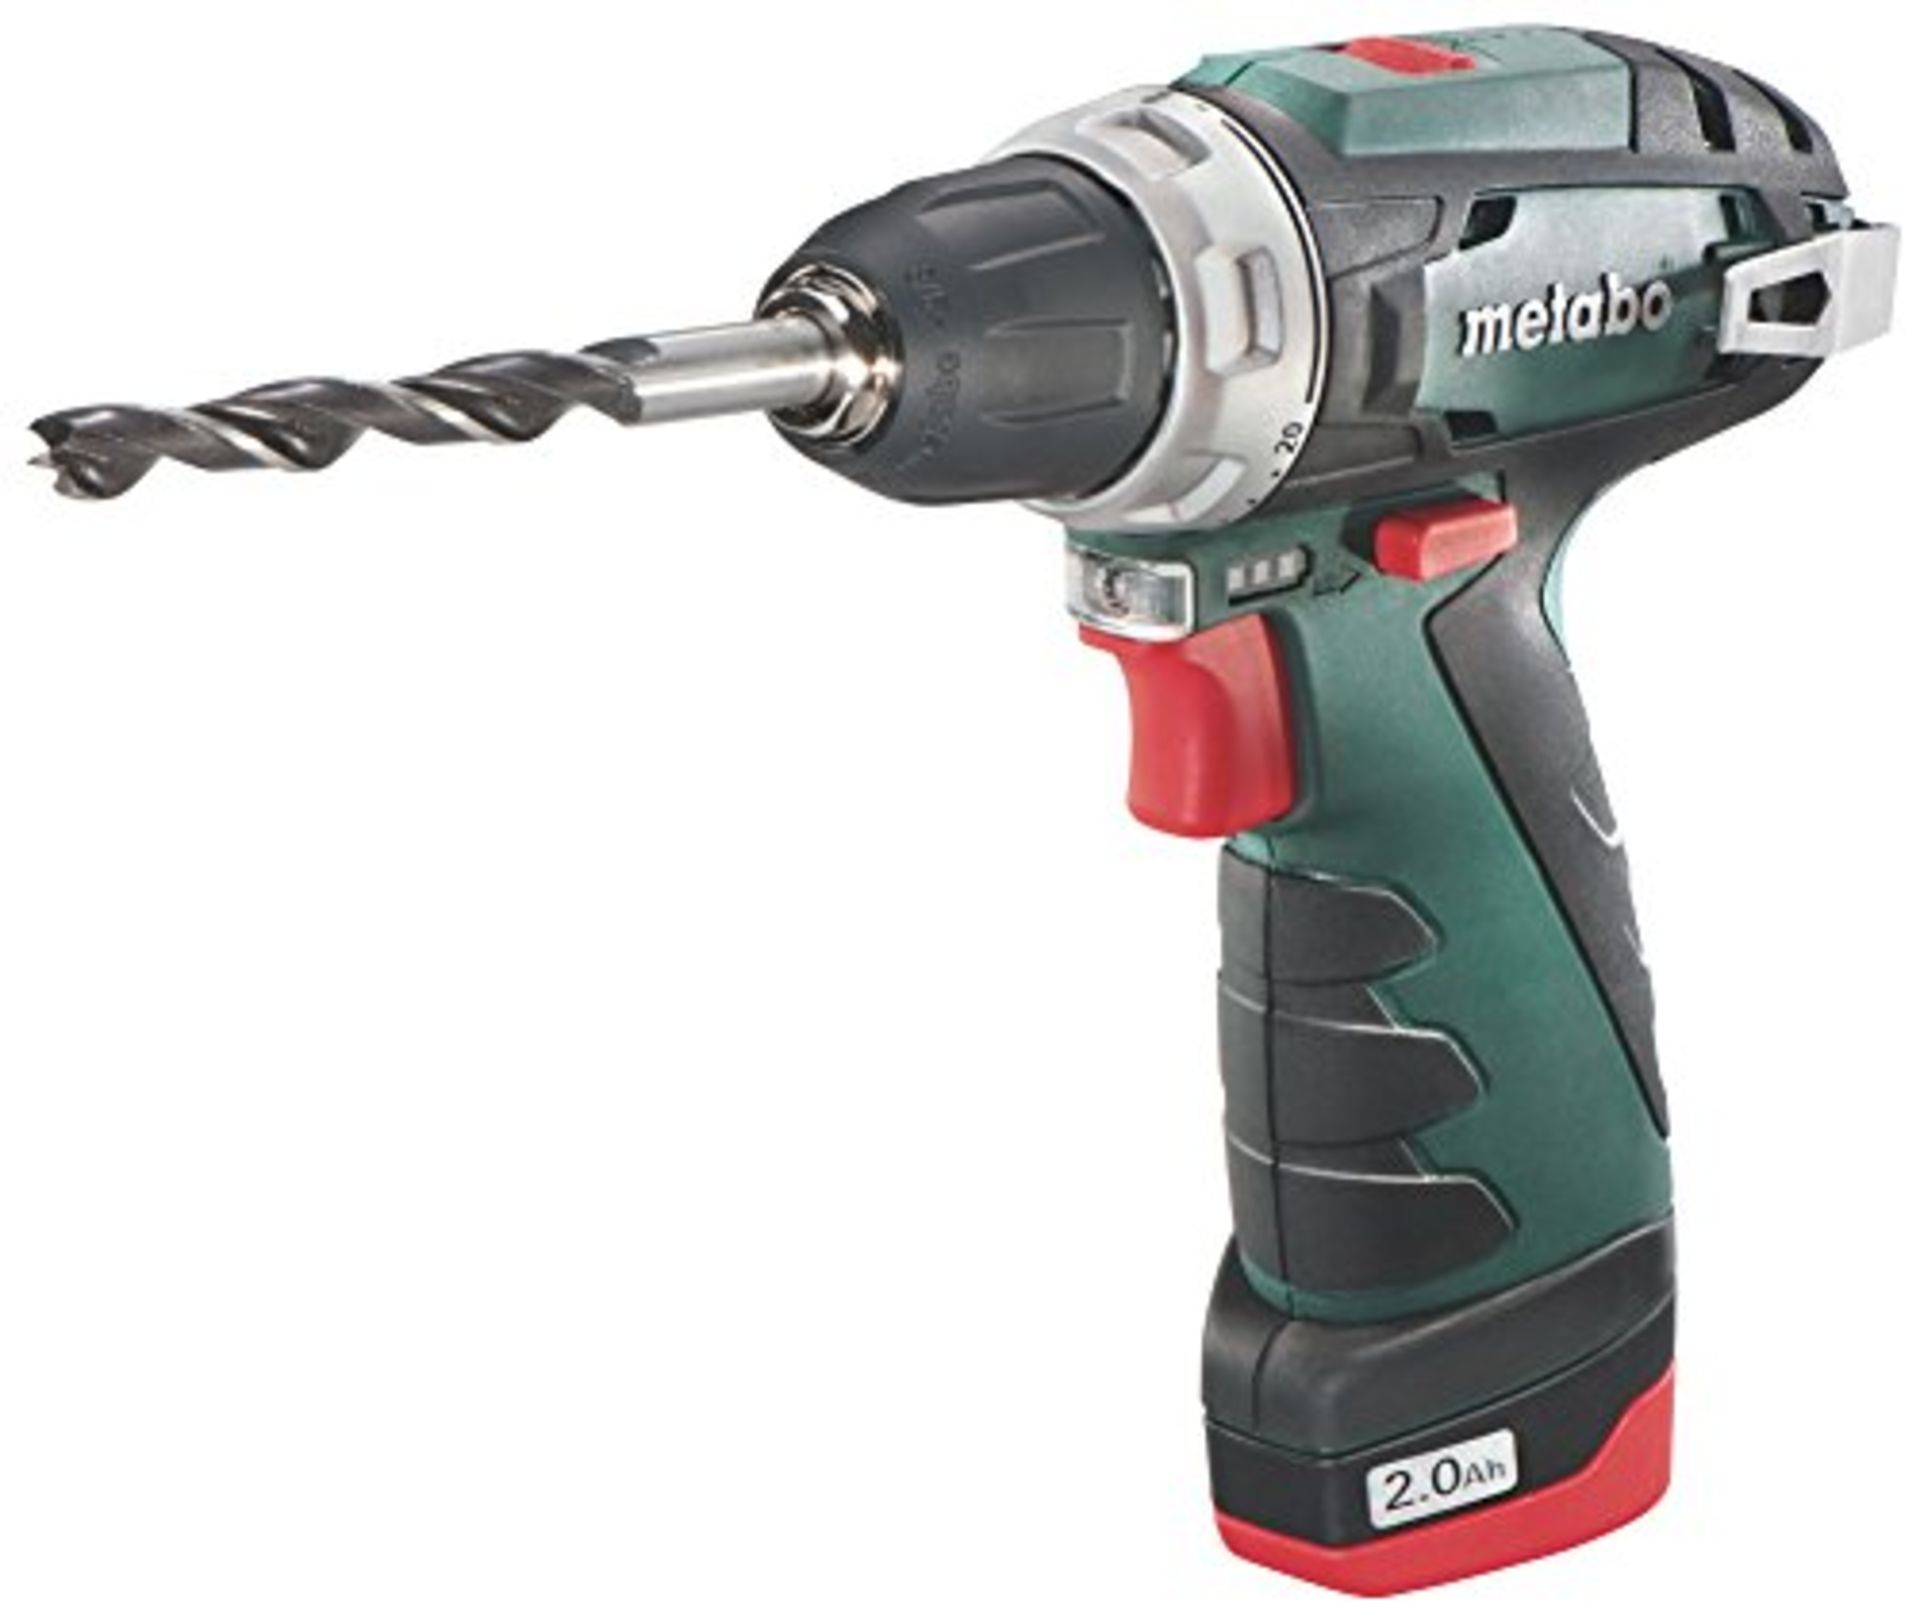 1 x Metabo 600080500 10.8 V Powermaxx BS Drill Driver with 2 x 2 A Batteries - Green/Black | EAN: 80 - Image 2 of 5